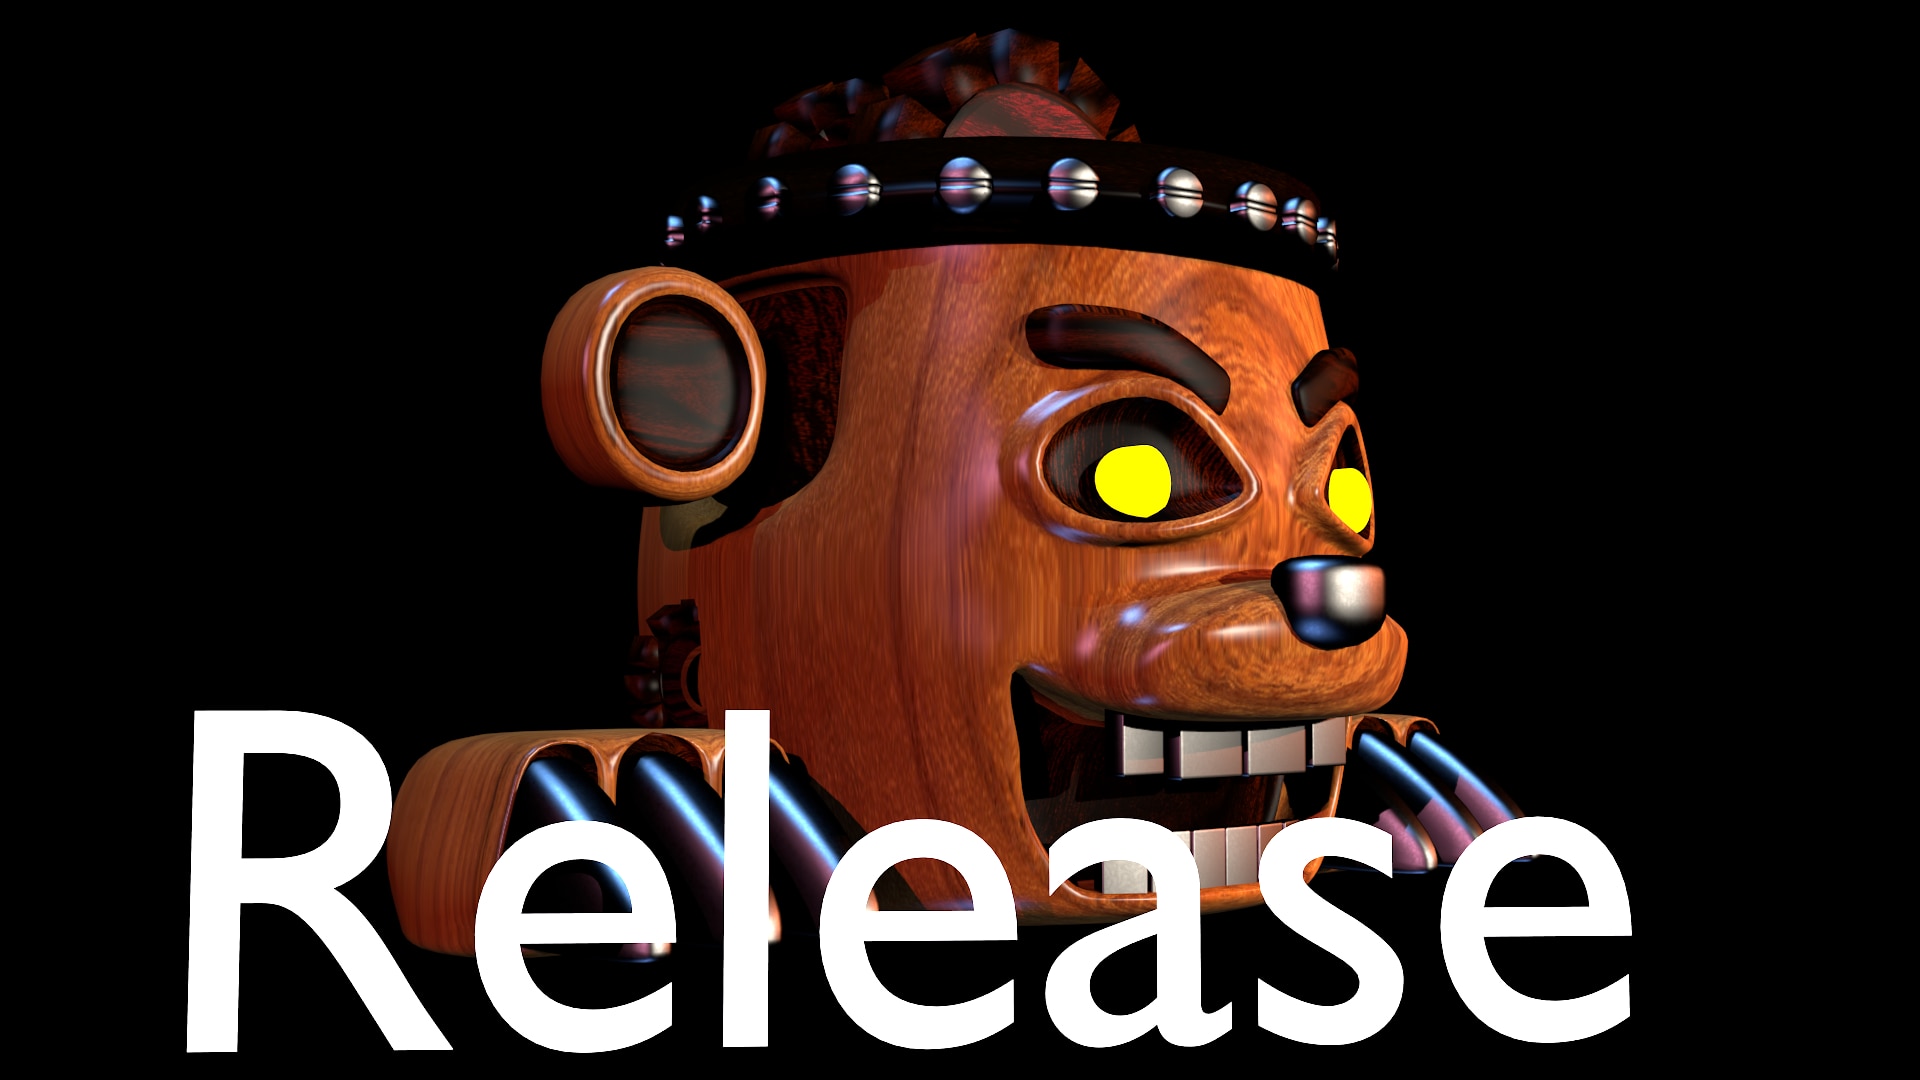 Five Nights at Freddy's: Roblox Edition is back with an amazing update!  We've added custom night, gameplay improvements, custom UI and some new  secrets! NOTE: this game is completely free and is